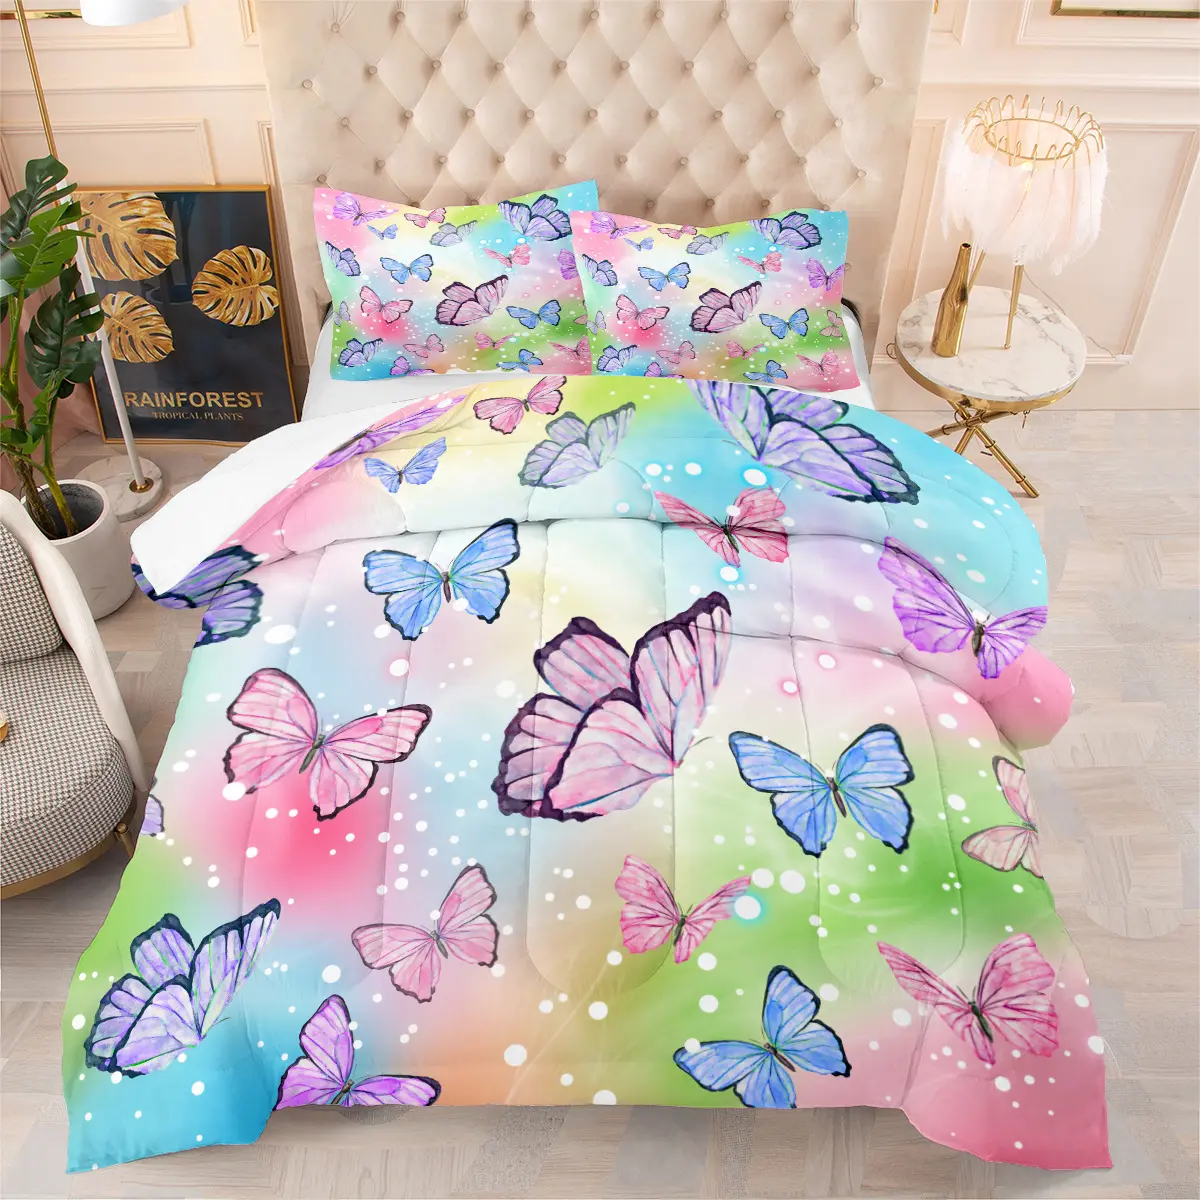 Ready to Ship Comfortable Filling Plant Floral Butterfly Pattern Microfiber Polyester Bed Sheet 3pcs Bedding Set